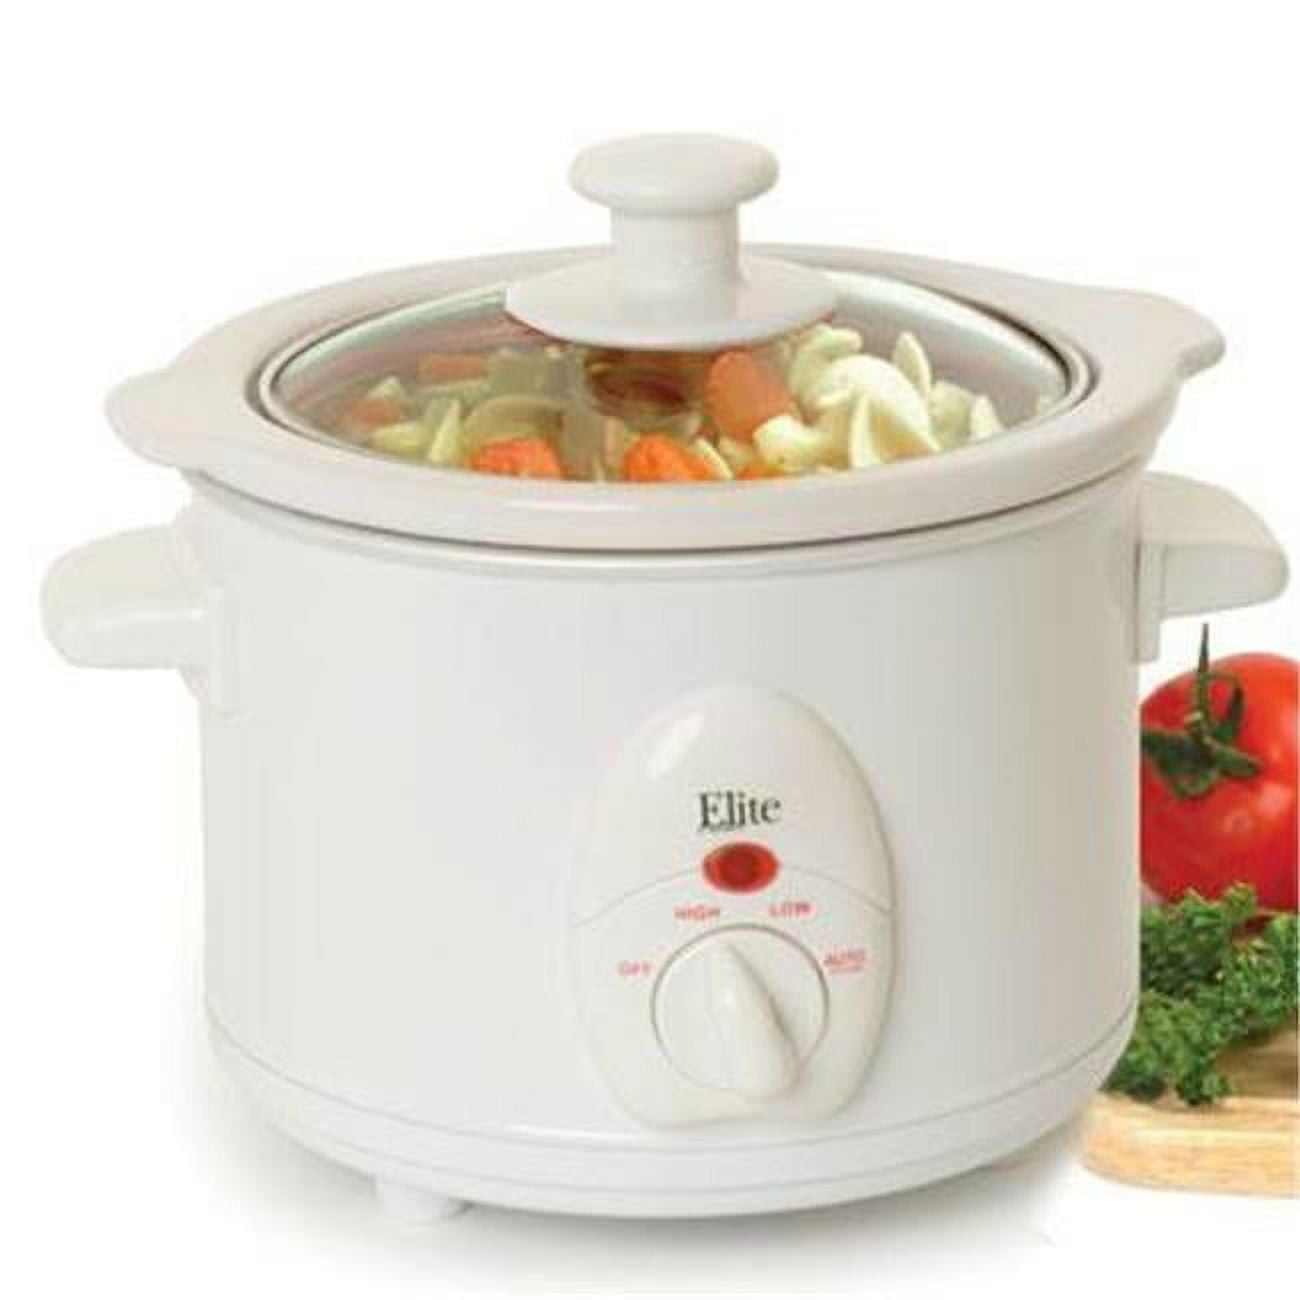 Slow Cooker White, Small Slow Cooker 1qt, Smart Appointment, Ceramic Interior Pot, Automatic Multi-function Rice Cooker - As Picture